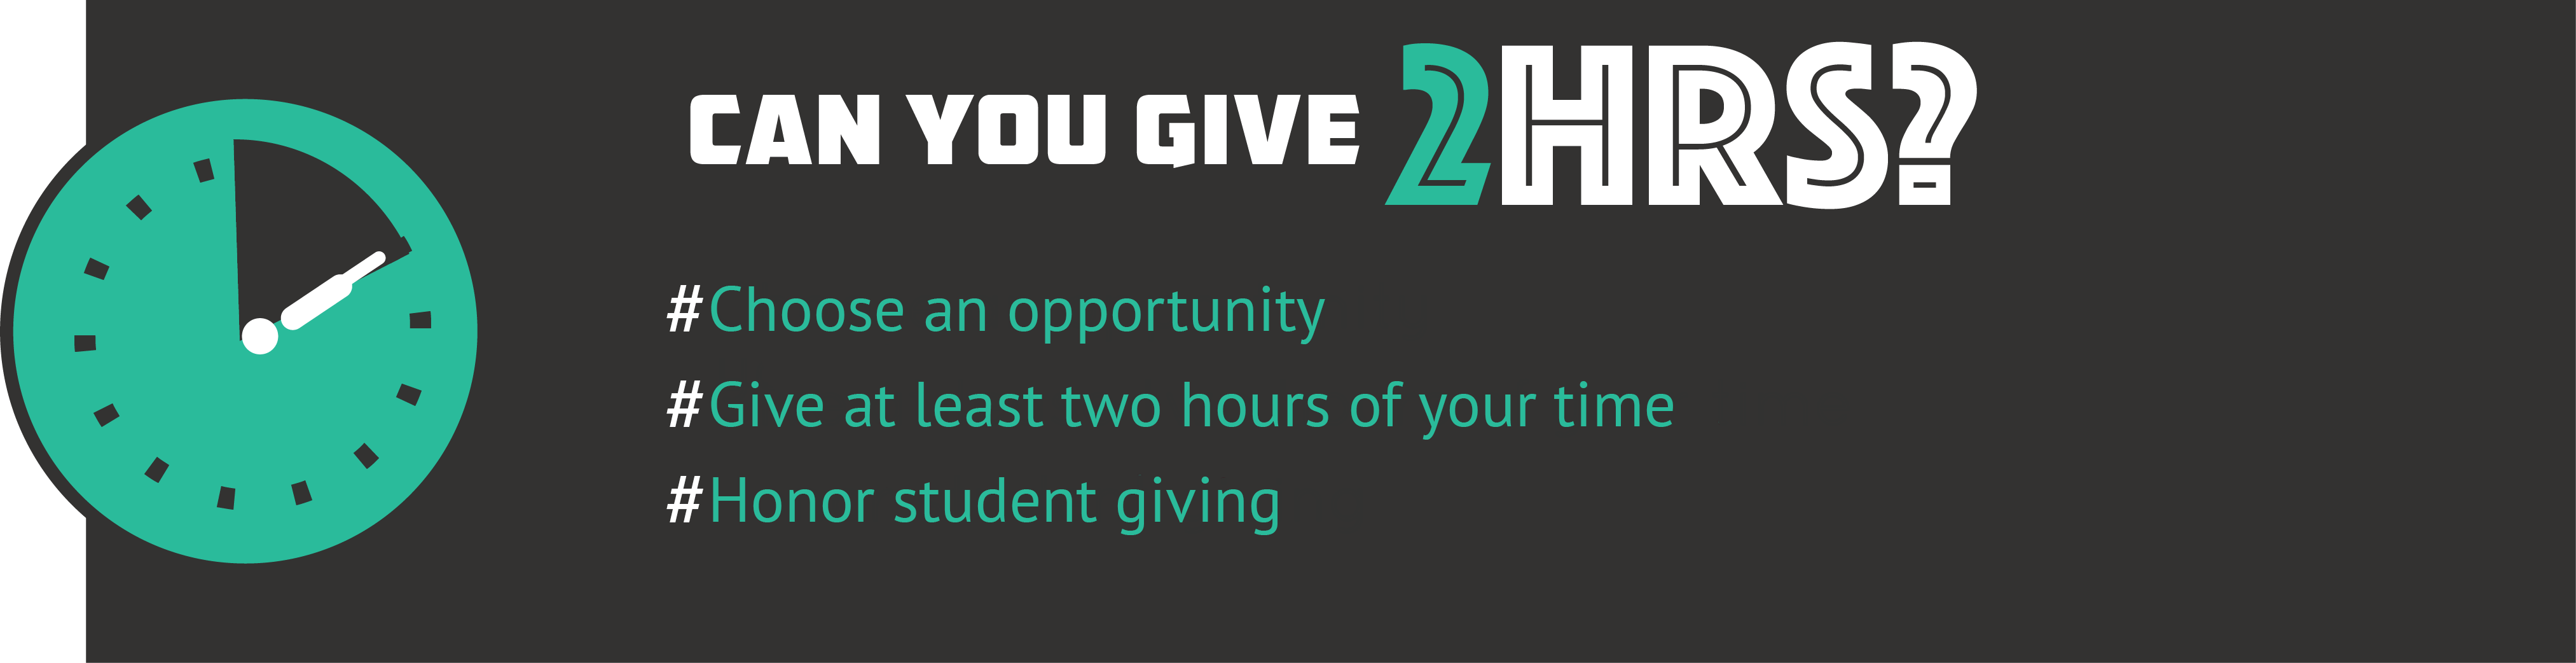 Banner for the iSchool iGive campaign asking students to give two hours of volunteer time